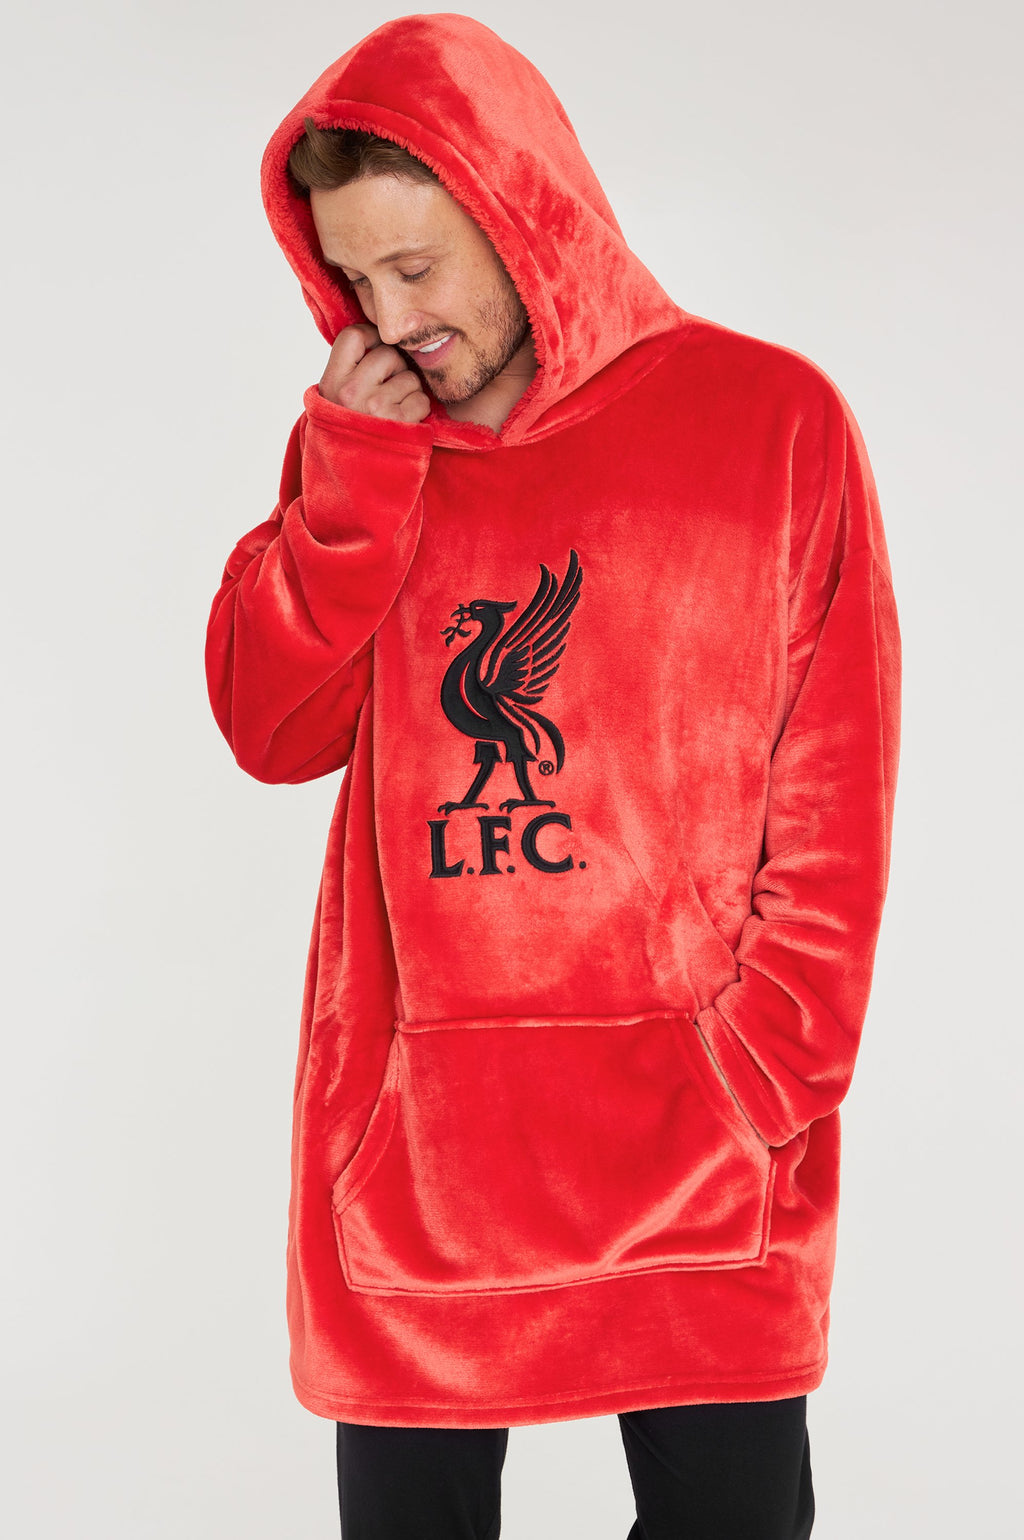 Liverpool F.C. Oversized Red Hoodie Blanket For Men, Official Football